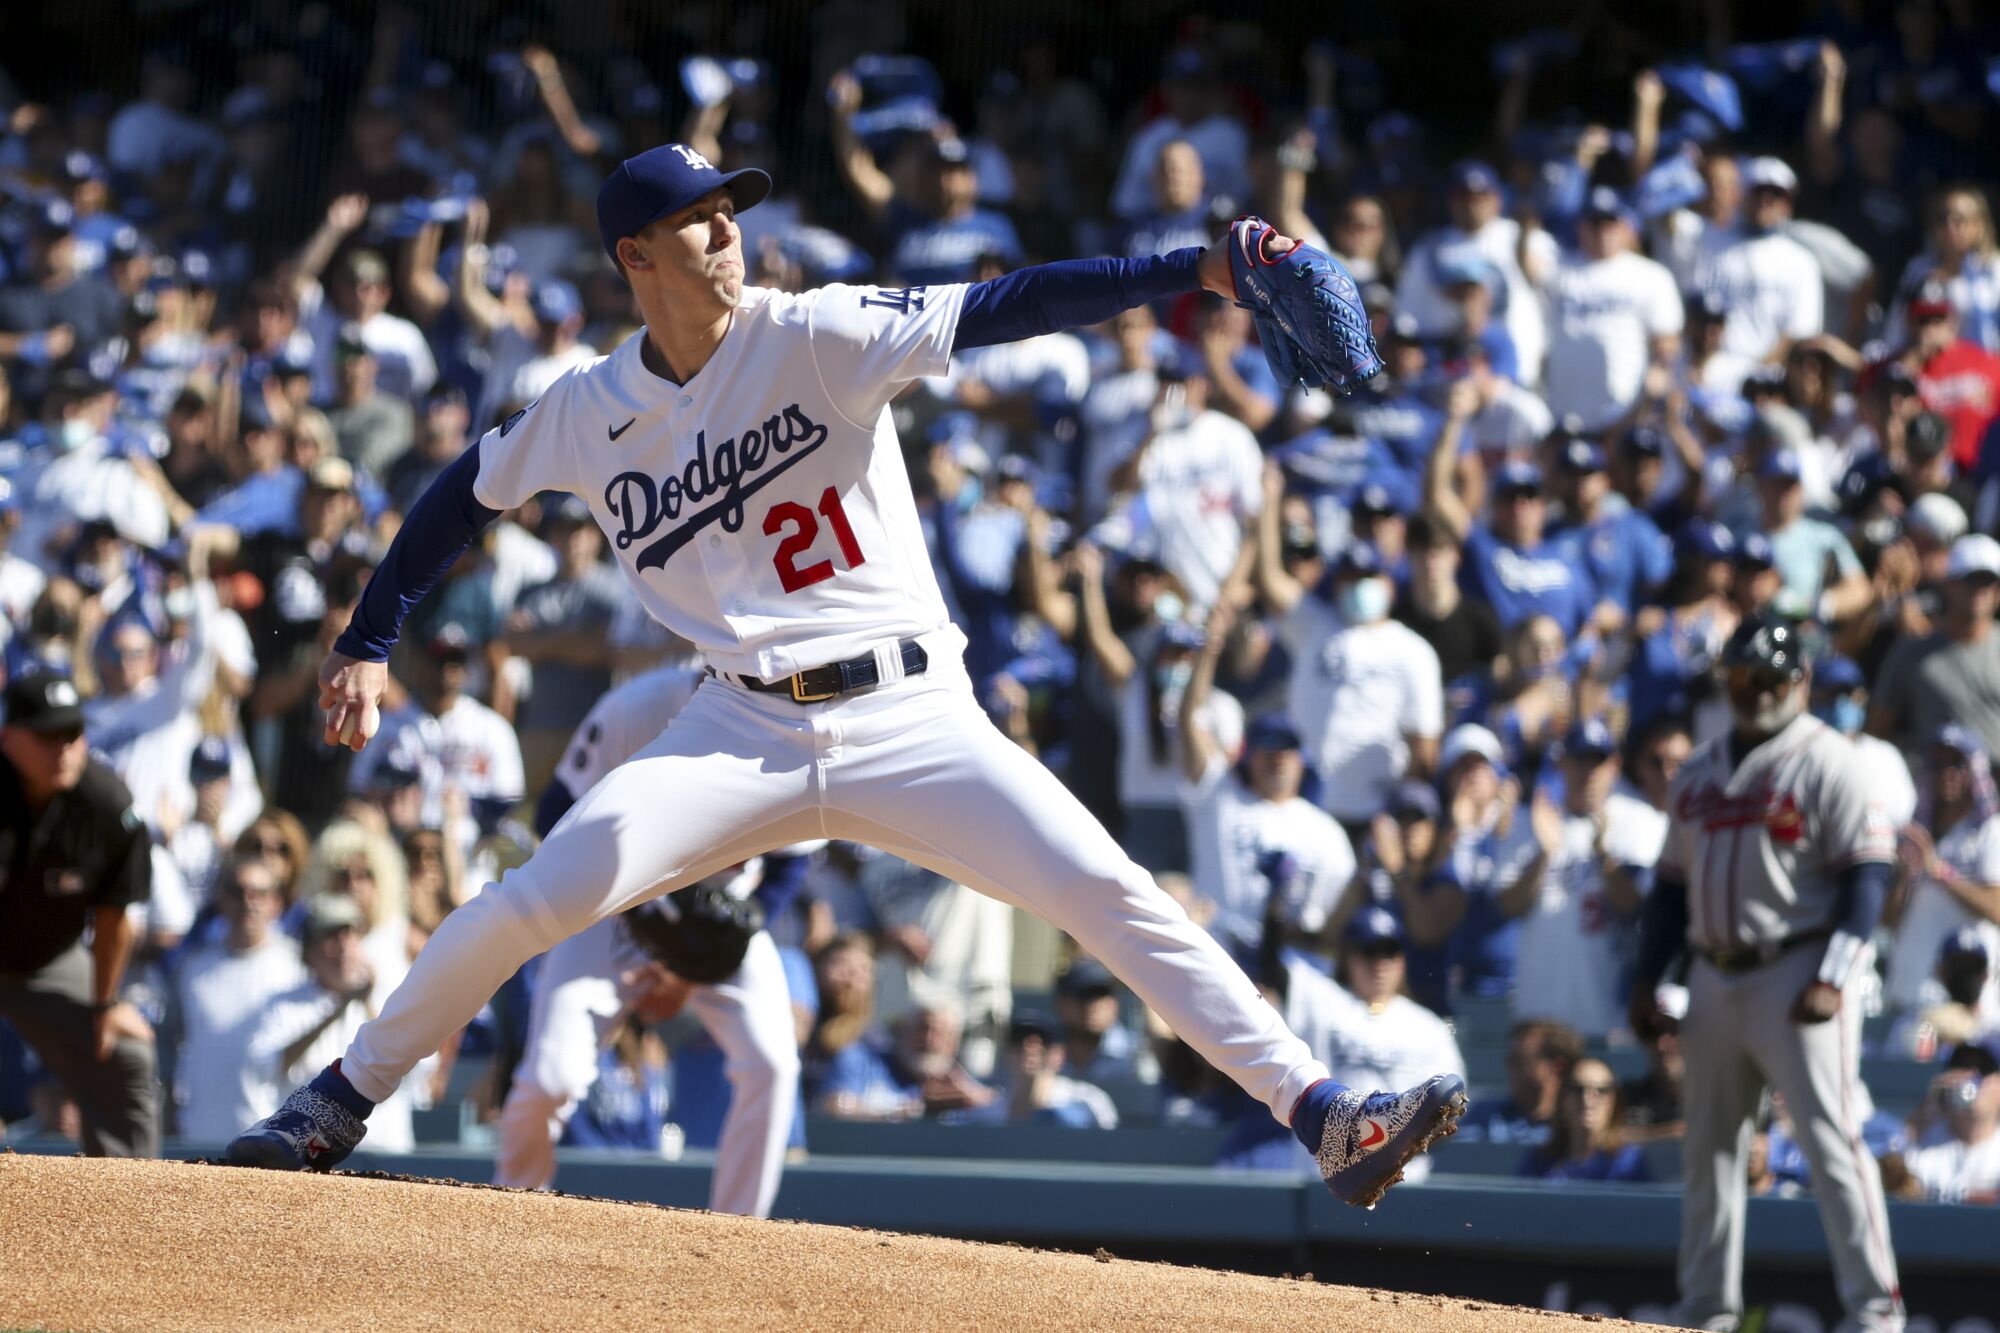 Dodgers starting pitcher Walker Buehler delivers a pitch during the first inning.